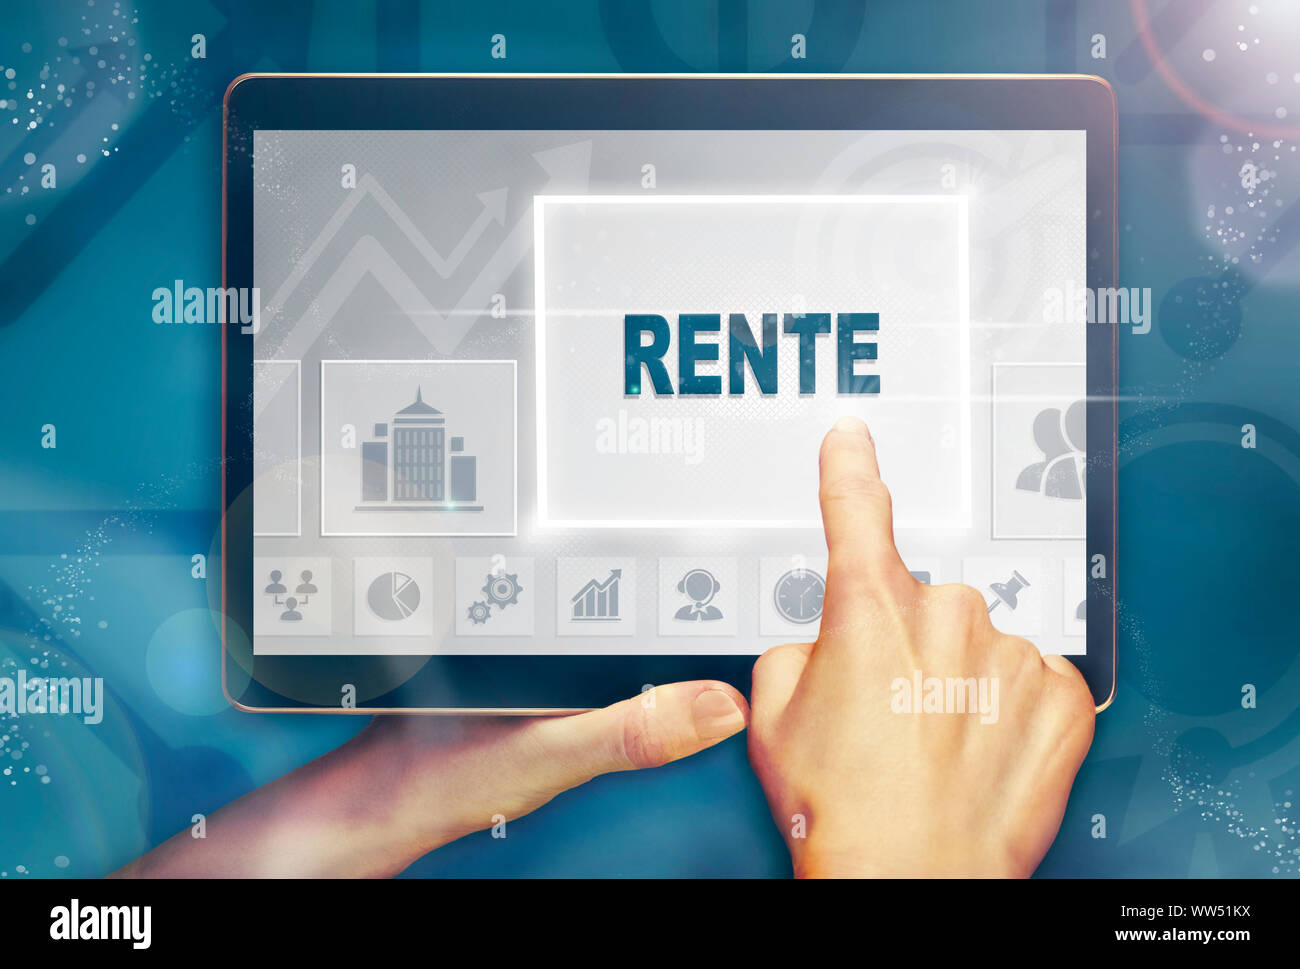 A hand holiding a computer tablet and pressing a Pension "Rente" business concept. Stock Photo